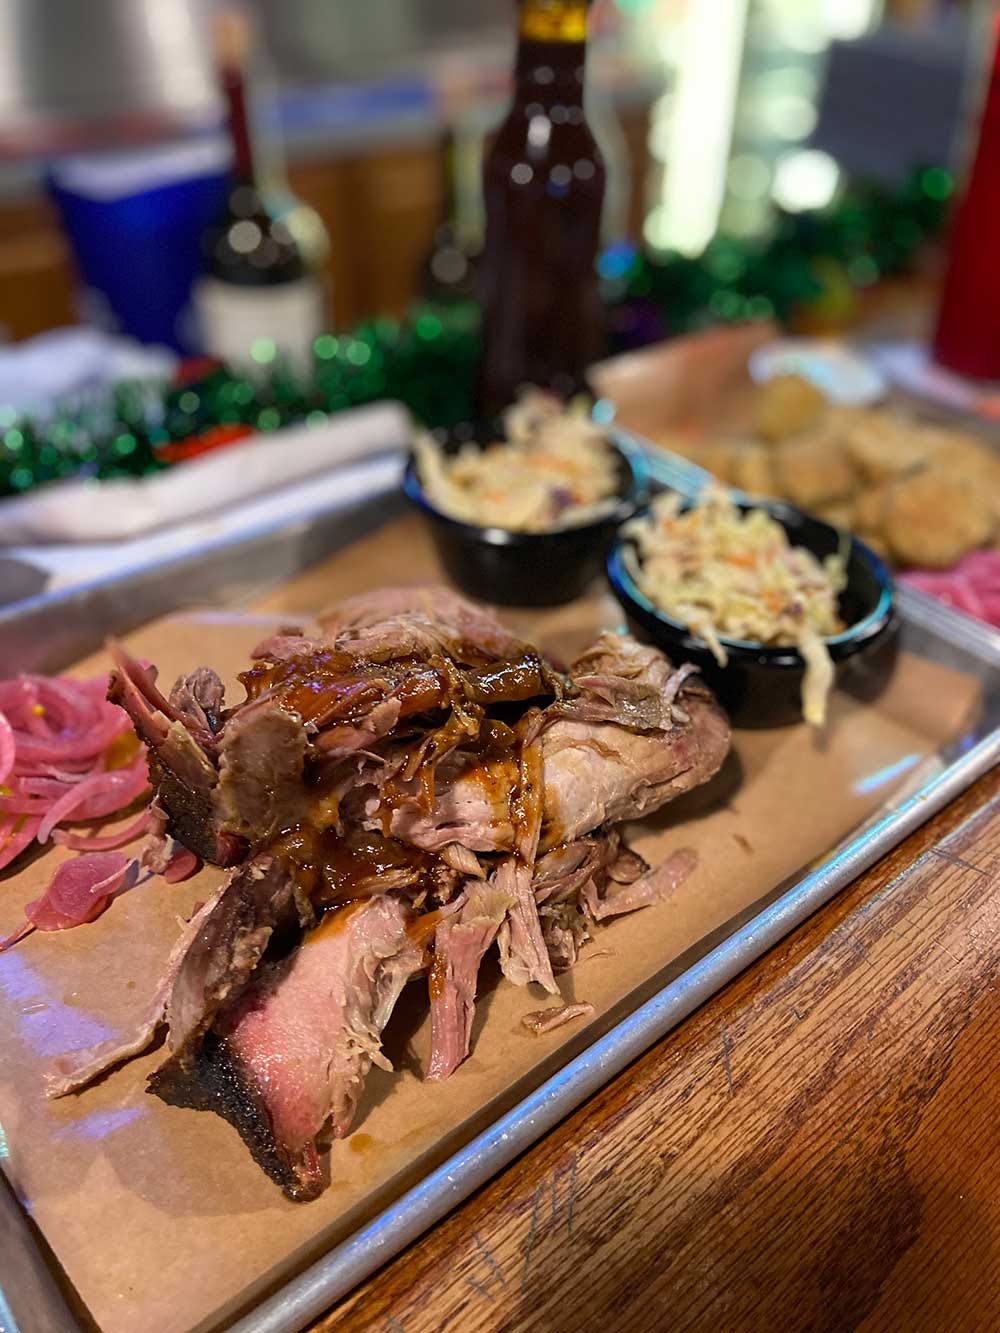 The BBQ at Rockin Pig was delicious!